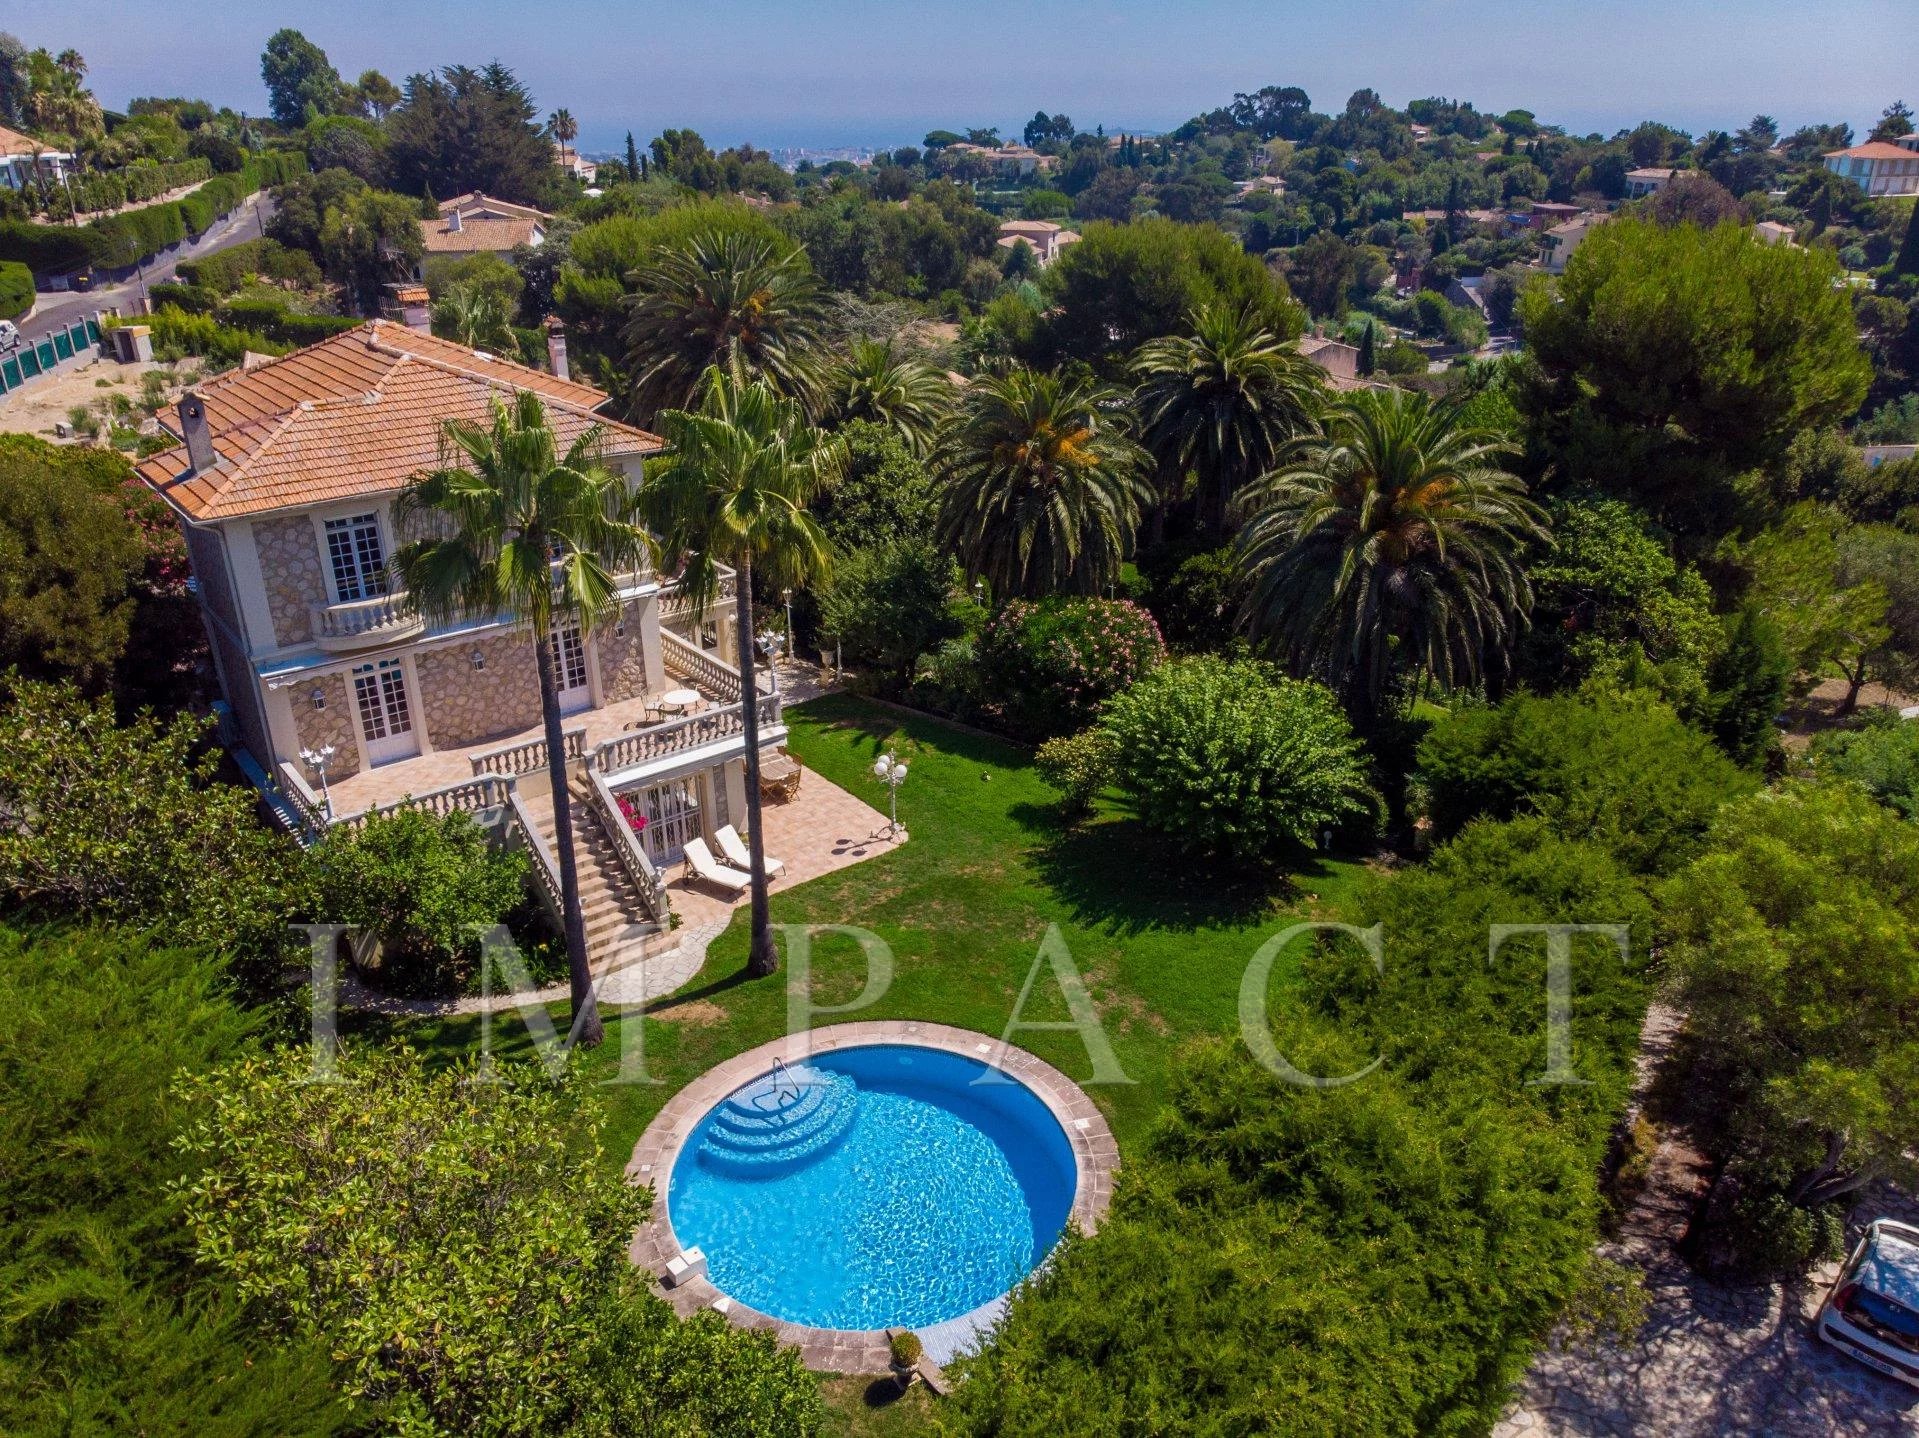 HOUSE FOR SALE - SUPER CANNES